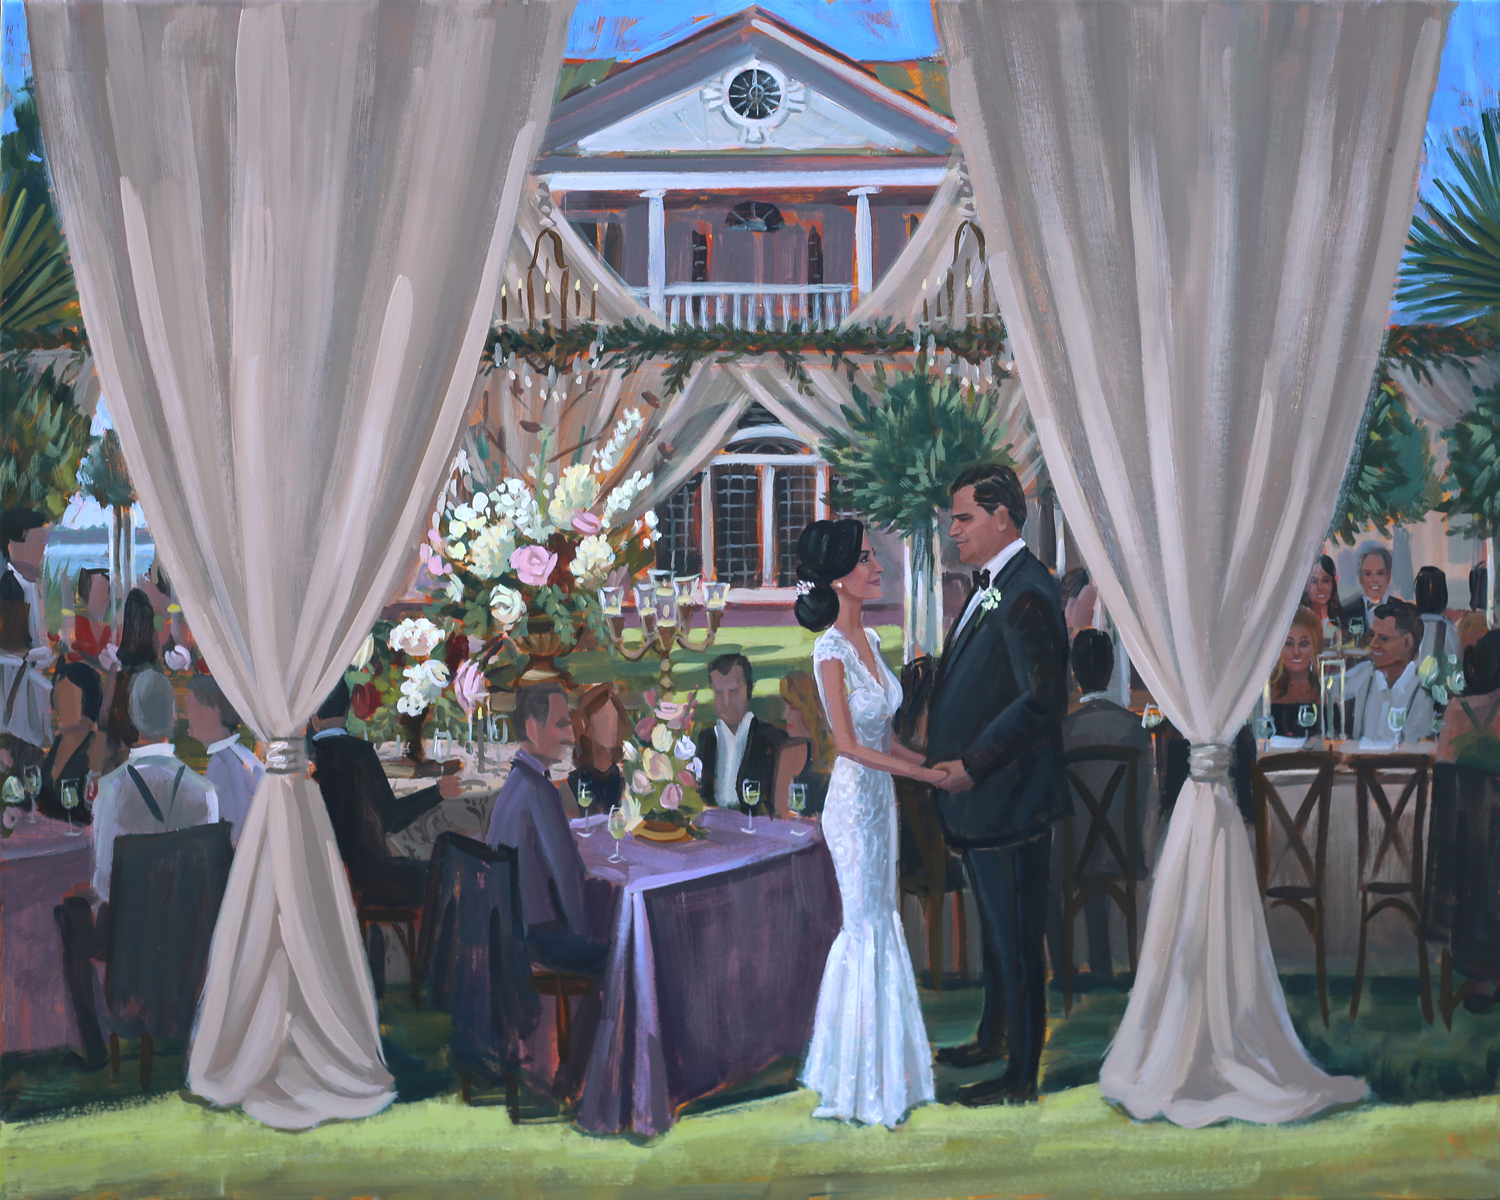 Christina + Gabe celebrated their wedding at the iconic Lowndes Grove Plantation in downtown Charleston, SC. Live Wedding Painter, Ben Keys, captured a sweet moment on canvas of the newlyweds standing outside of their gorgeous al fresco tent there o…